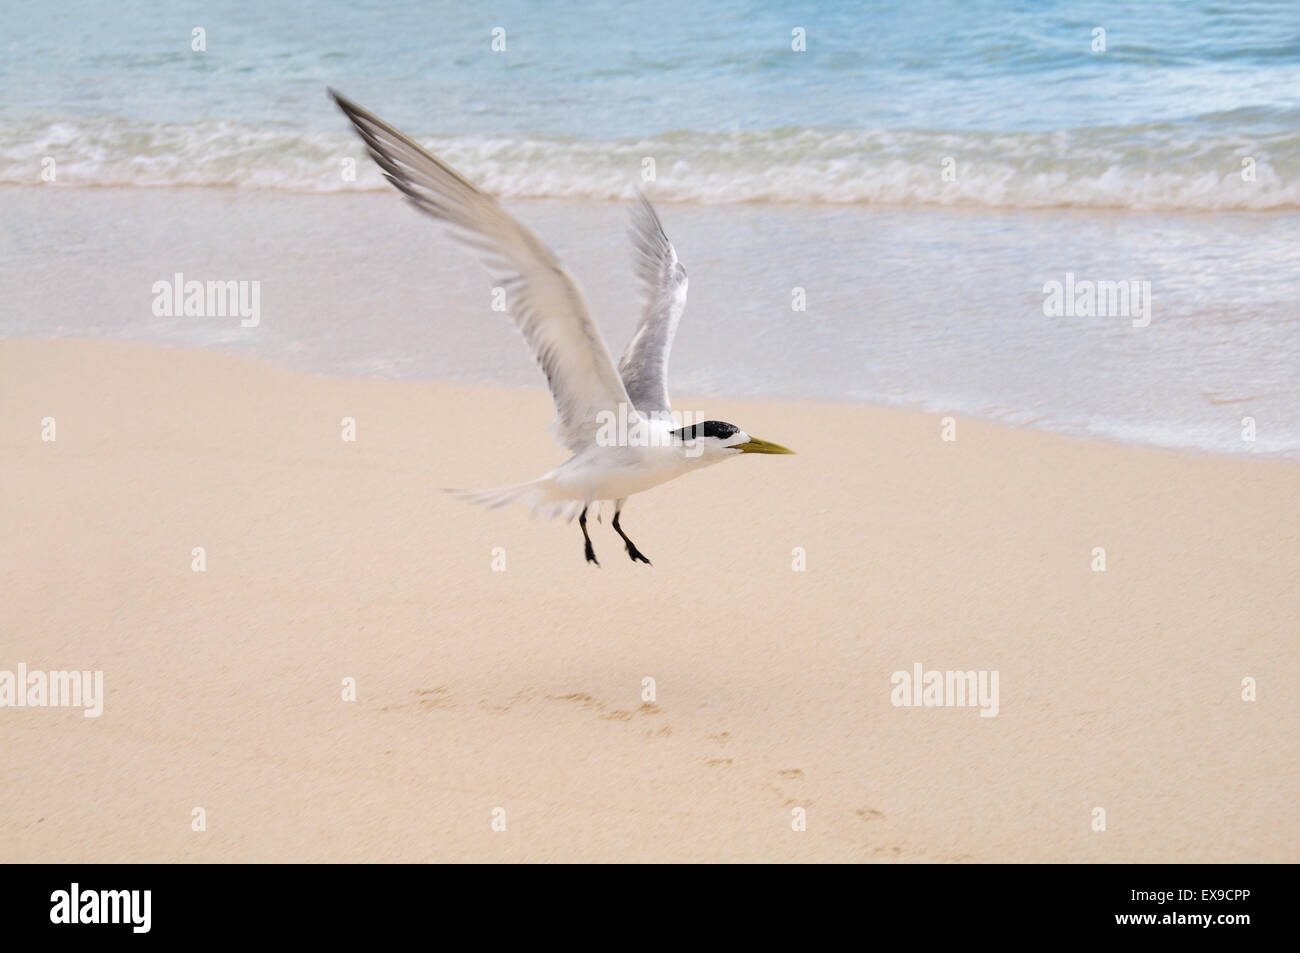 greater crested tern, crested tern or swift tern (Thalasseus bergii) It takes off from the sandy beach, Denis island Stock Photo